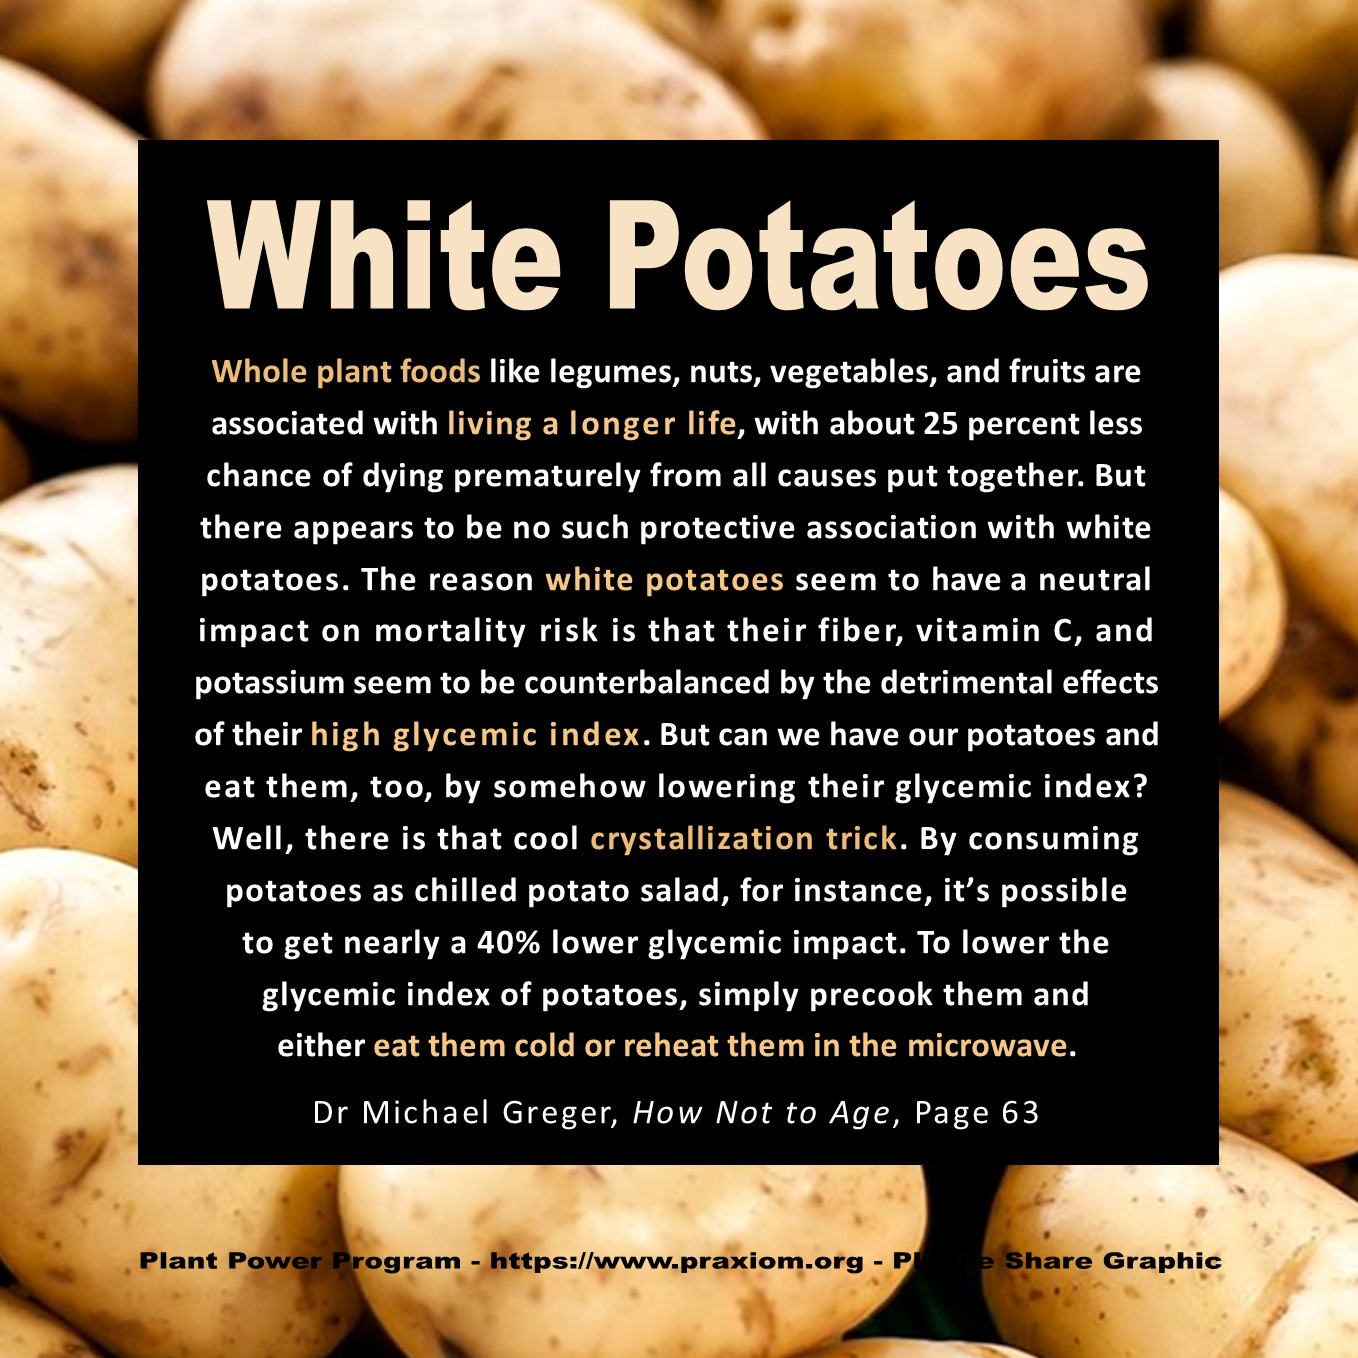 How to Prepare White Potatoes - Dr Michael Greger